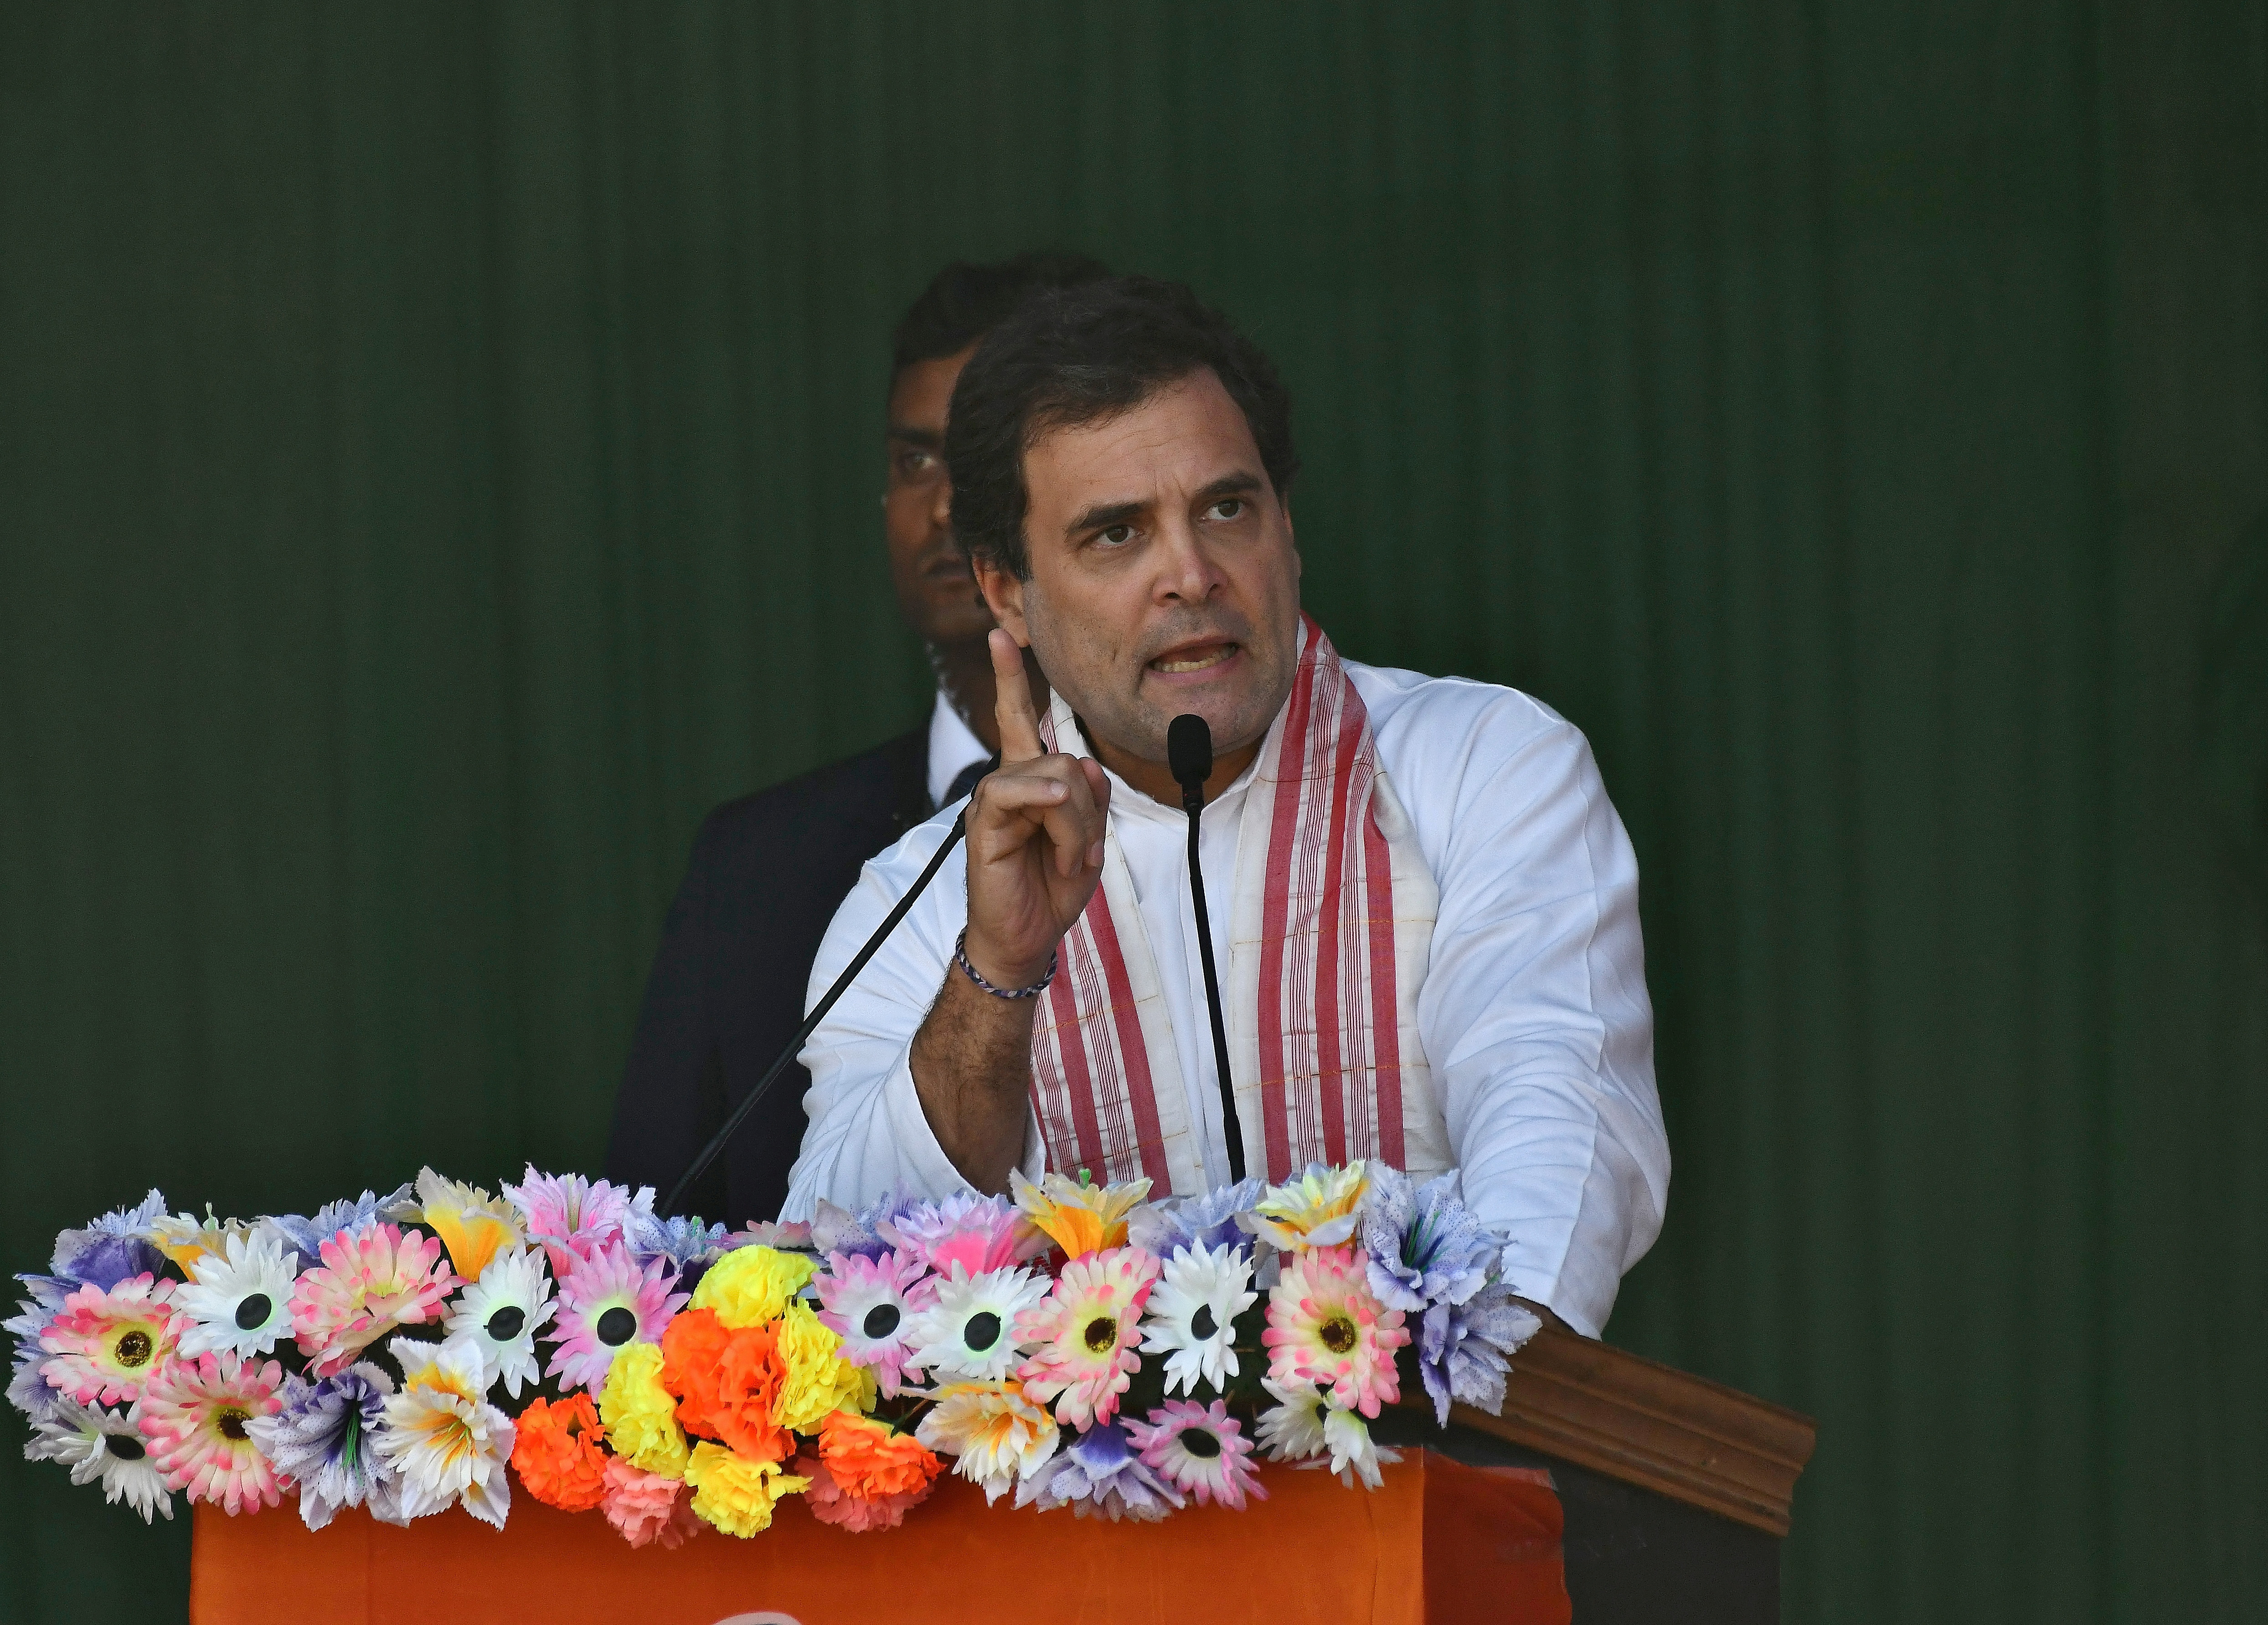 Rahul Gandhi, leader of India's main opposition Congress party, speaks as he attends a protest rally against a new citizenship law, in Guwahati, India, December 28, 2019. REUTERS/Anuwar Hazarika/File Photo